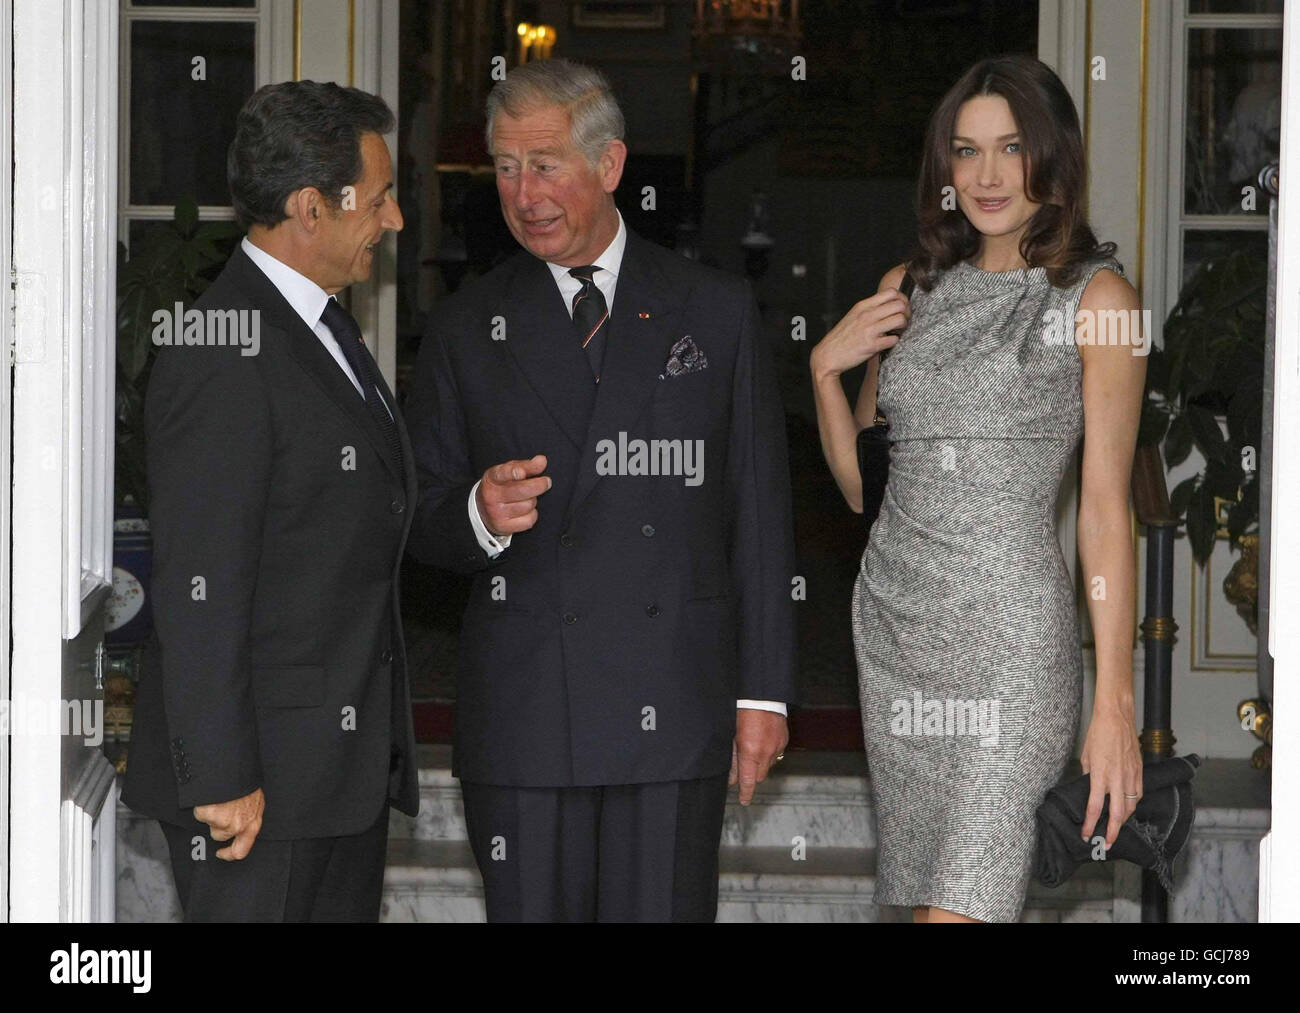 The Prince of Wales greets the French President Nicolas Sarkozy, and his wife Carla Bruni at Clarence House, London during the President's visit to mark the 70th anniversary of General Charles de Gaulle's radio broadcast urging his nation to resist the Nazi occupation of France. Stock Photo